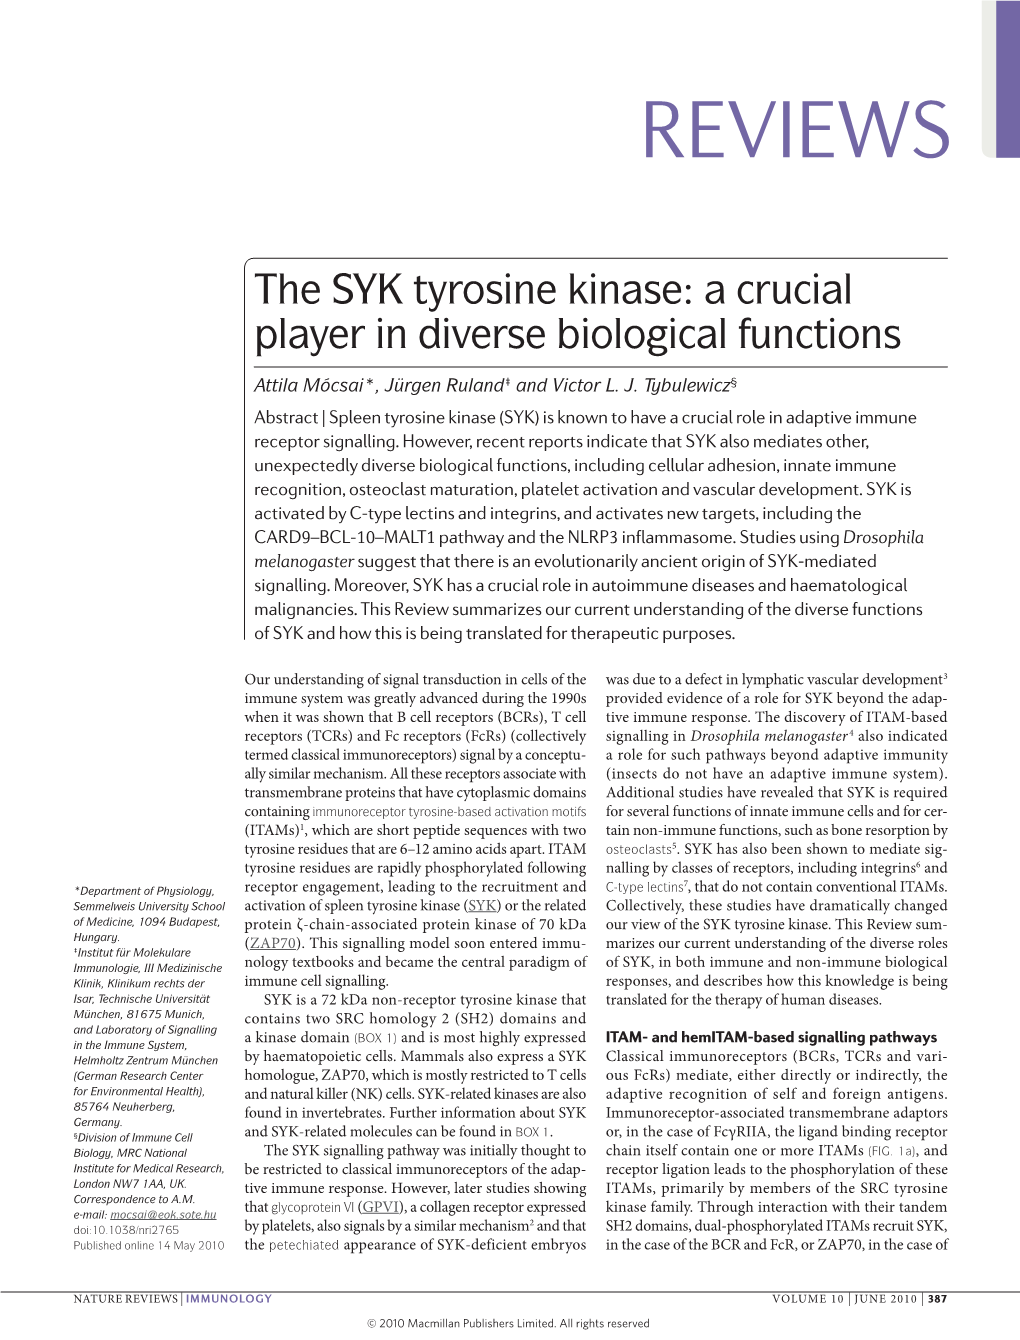 The SYK Tyrosine Kinase: a Crucial Player in Diverse Biological Functions